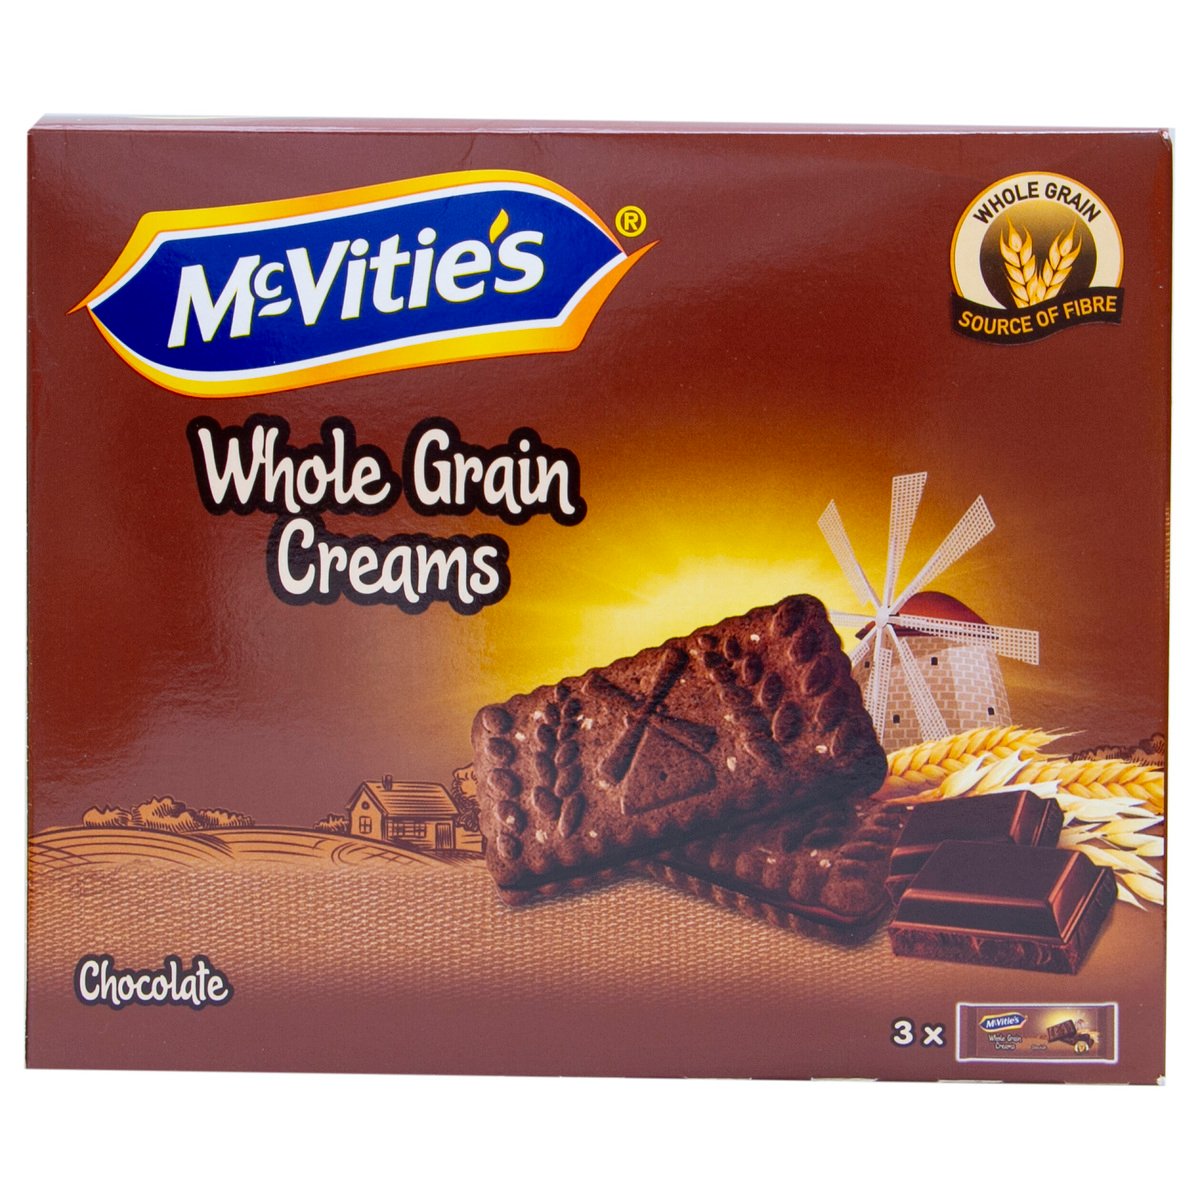 United Biscuits Mcvitie's Whole Grain Creams Chocolate Biscuit 3 x 100 g